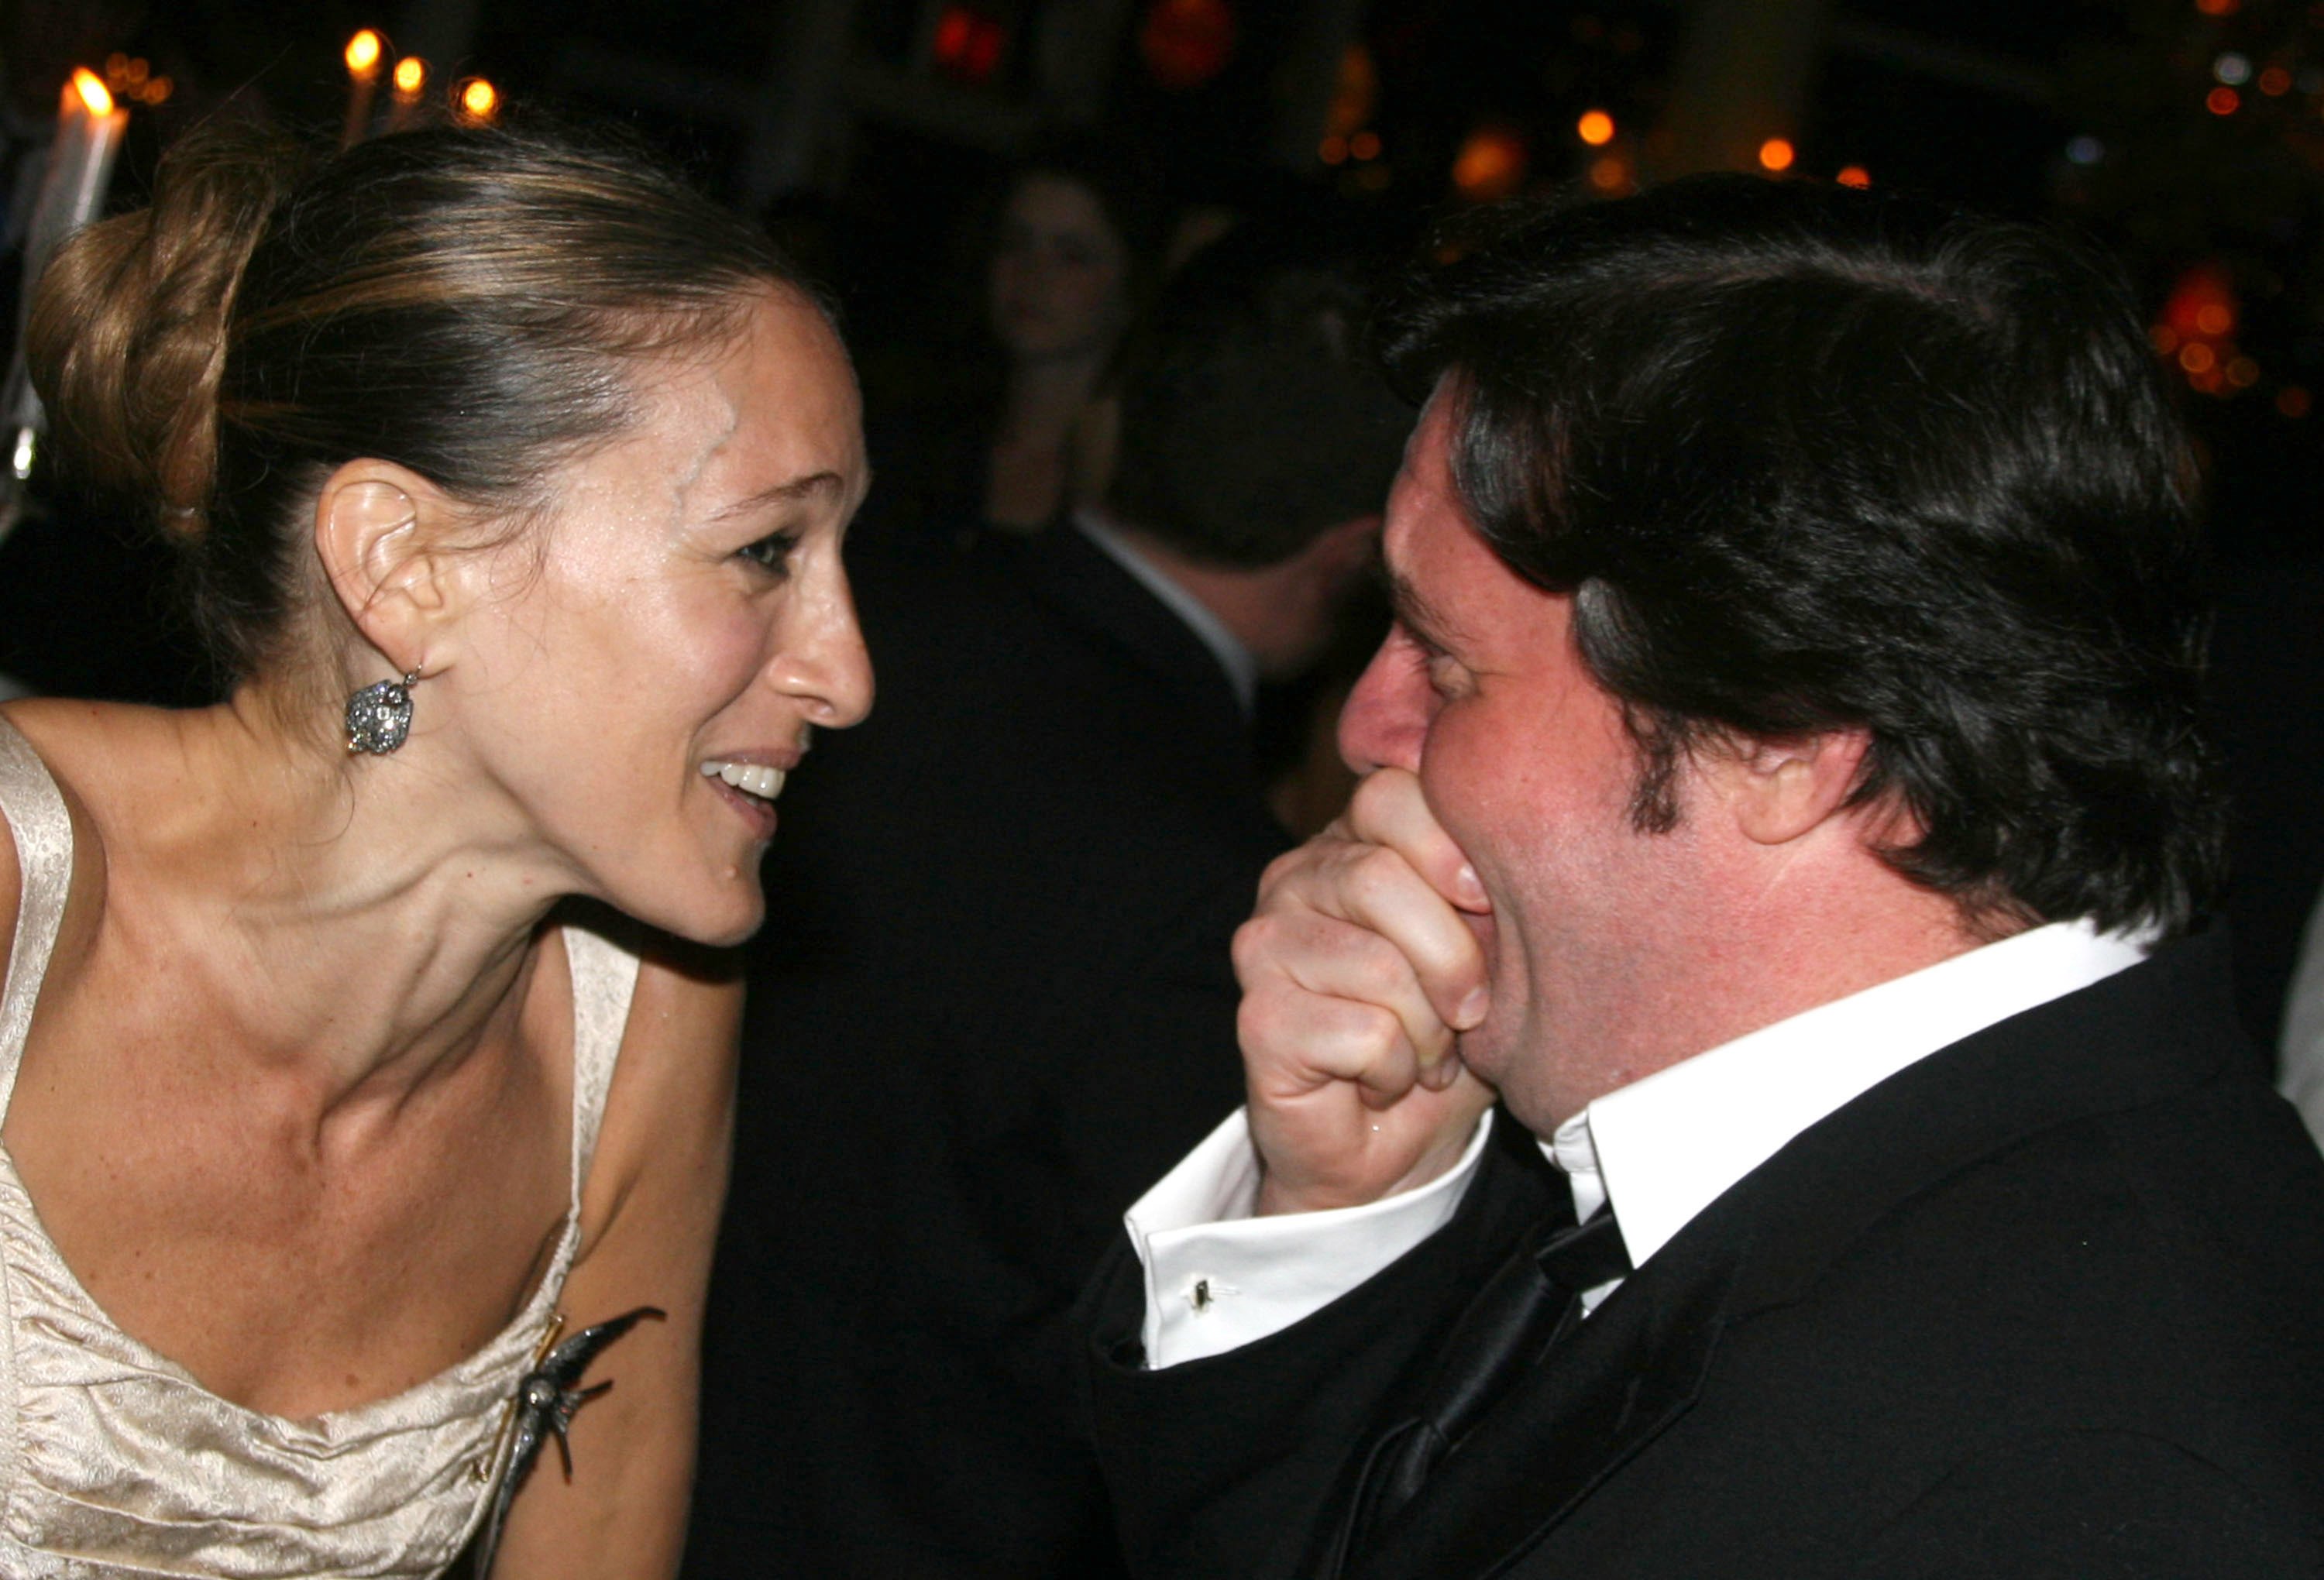 Sarah Jessica Parker and Nathan Lane chat during the opening of 'Martin Short: Fame Becomes Me' in New York